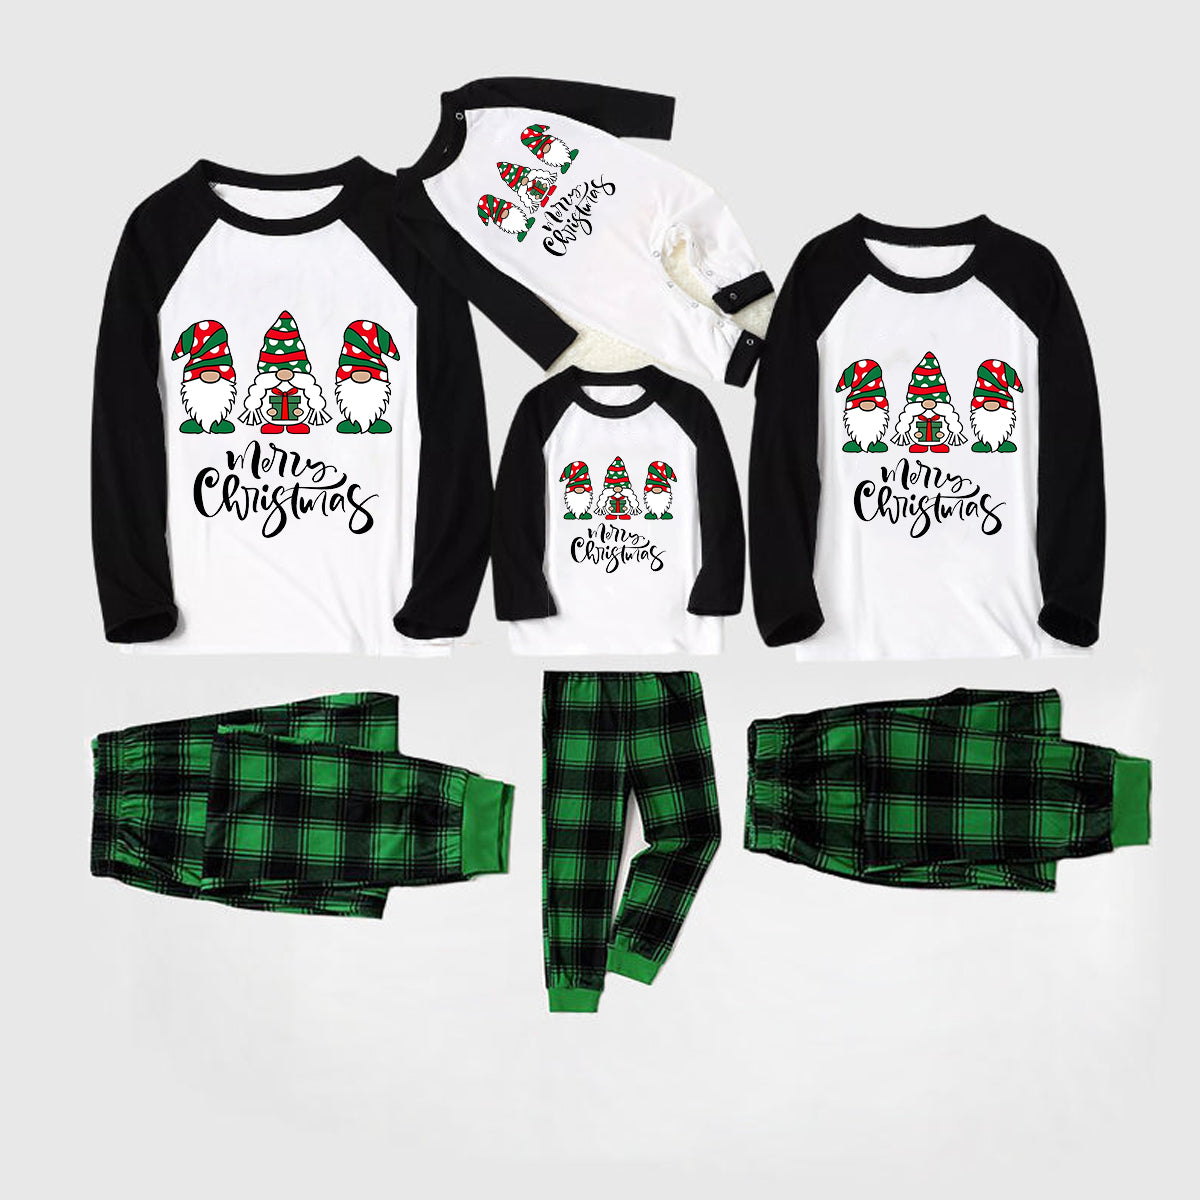 Merry Christmas Cute Gnome Print Casual Long Sleeve Sweatshirts Casual Long Sleeve Sweatshirts Black Contrast Top and Black and Gren Plaid Pants Family Matching Pajamas Sets With Dog Bandana